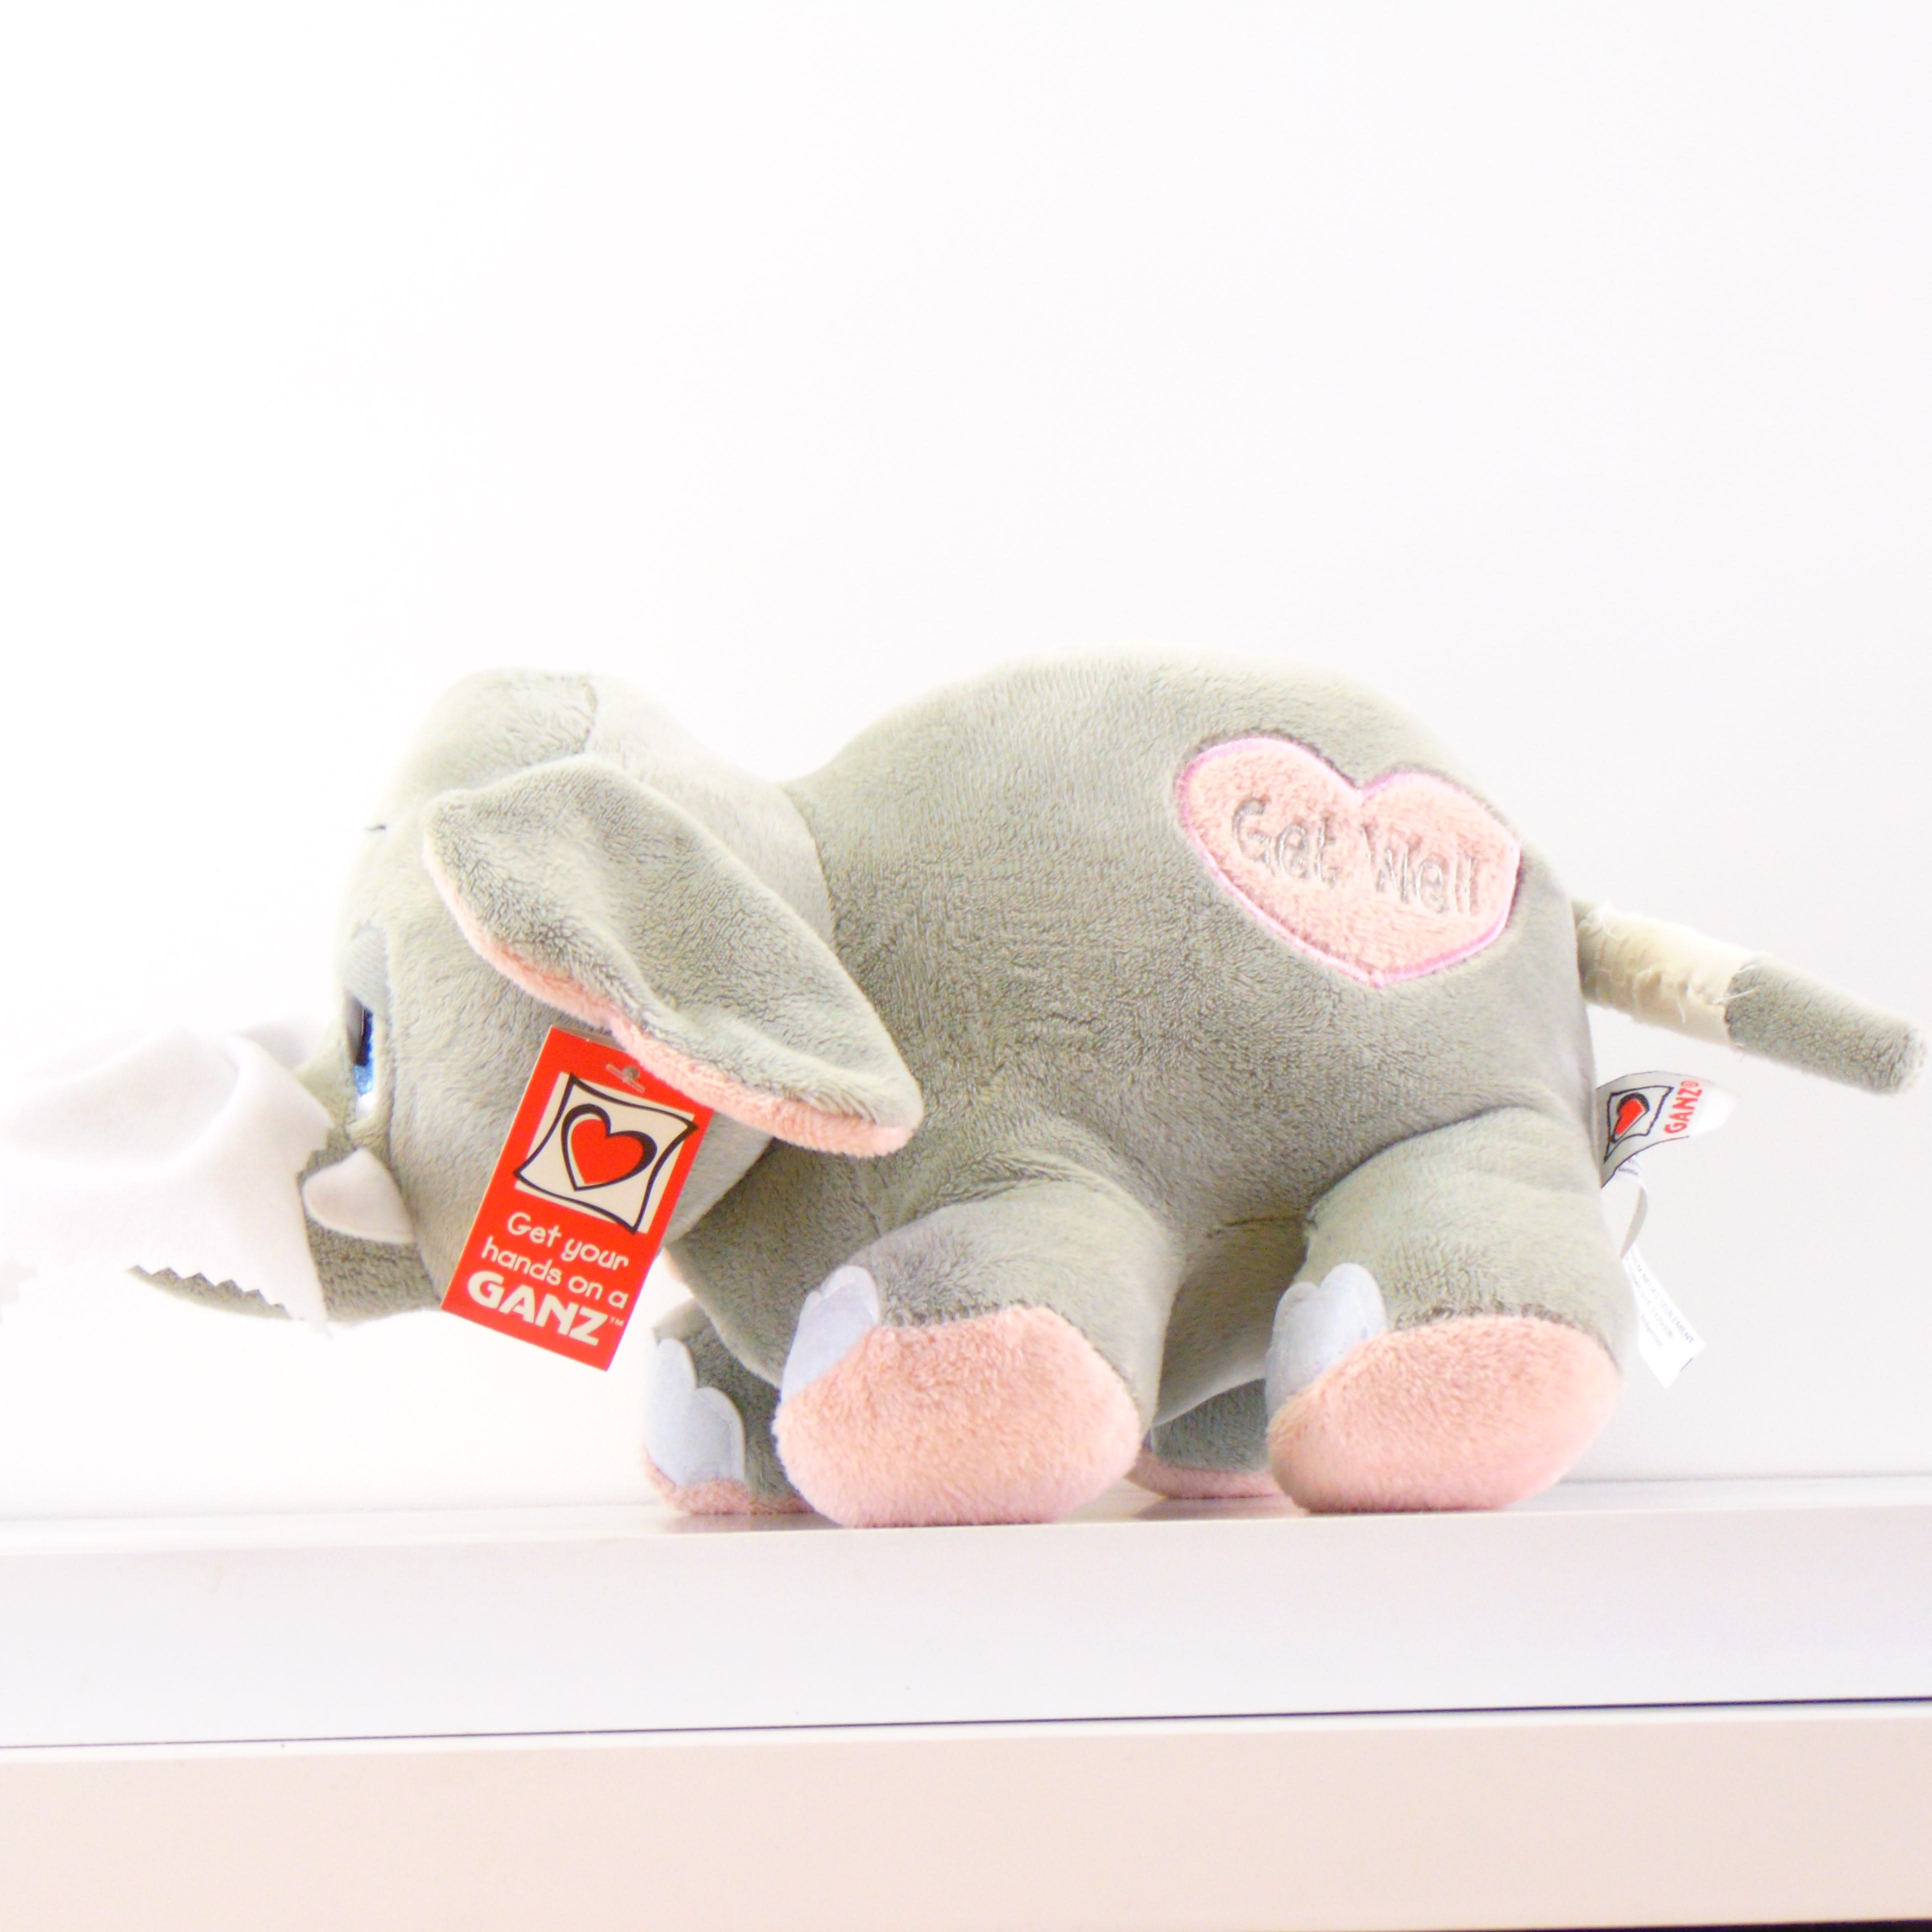 Get Well Elephant with Tissue - Plush Elephant by Ganz